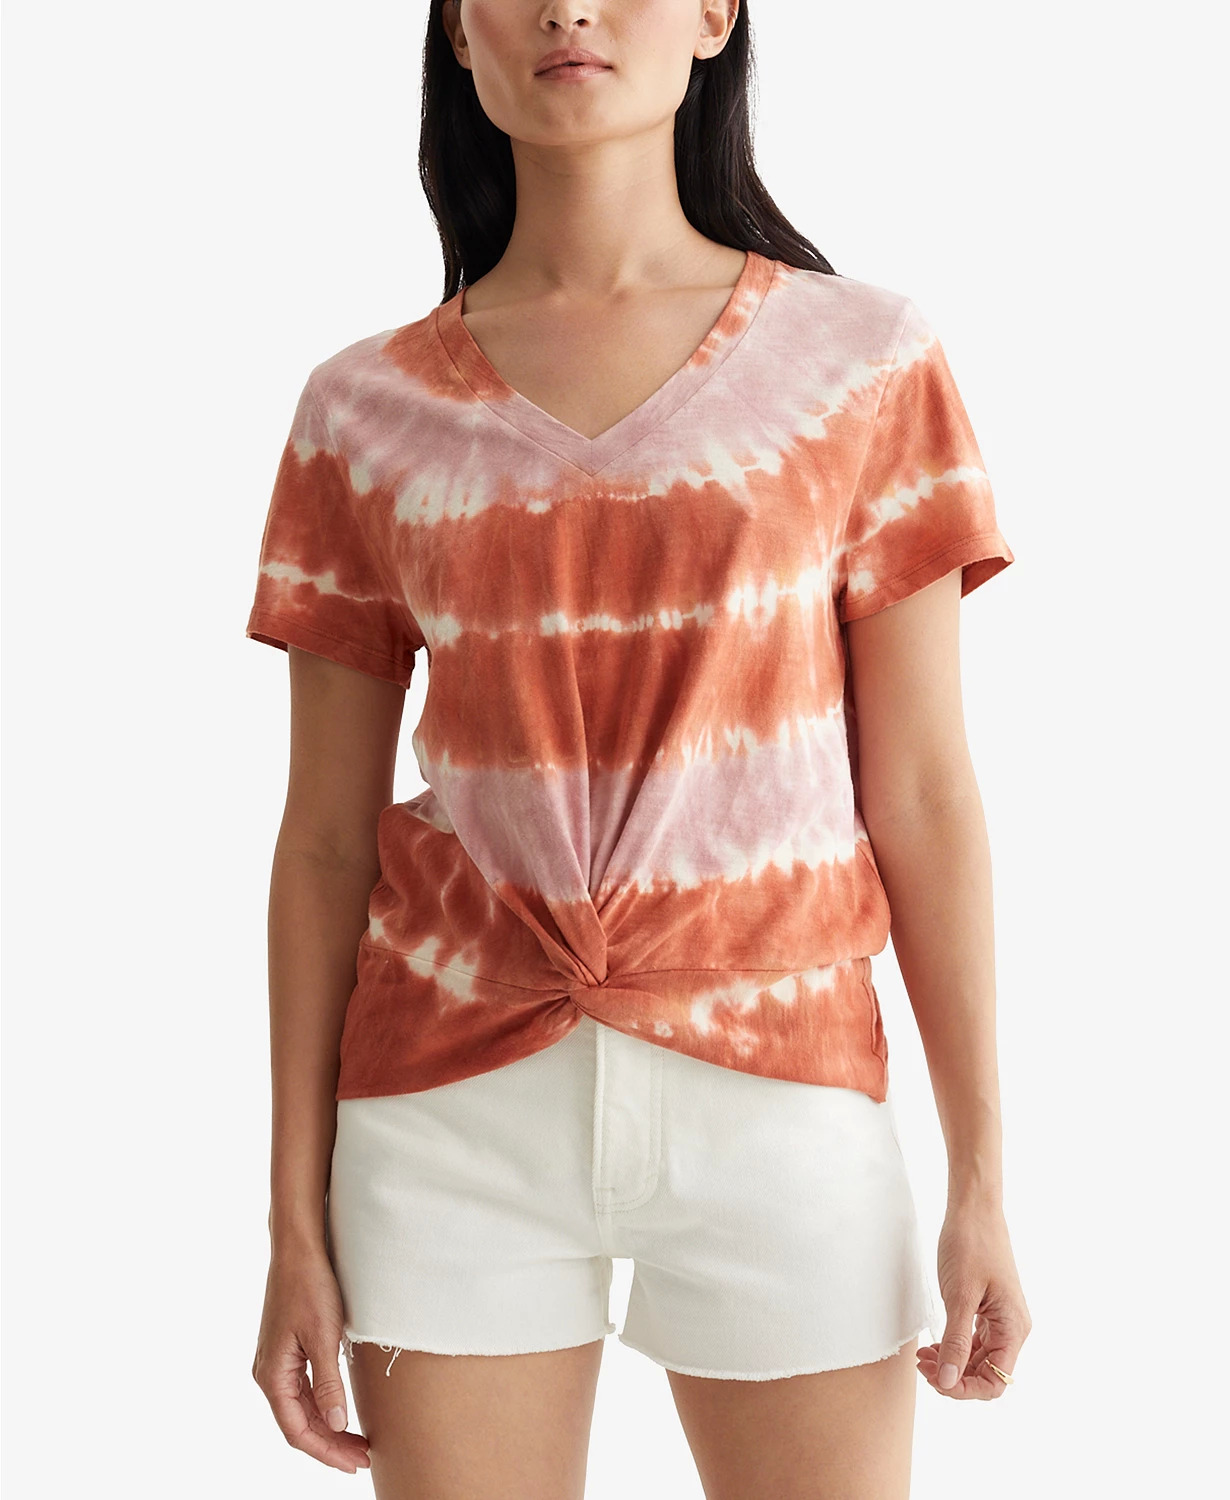 Lucky Brand Women's Cotton Twisted T-Shirt (various) $6.96 & More + SD Cashback + Free Store Pickup at Macy's or FS on $25+